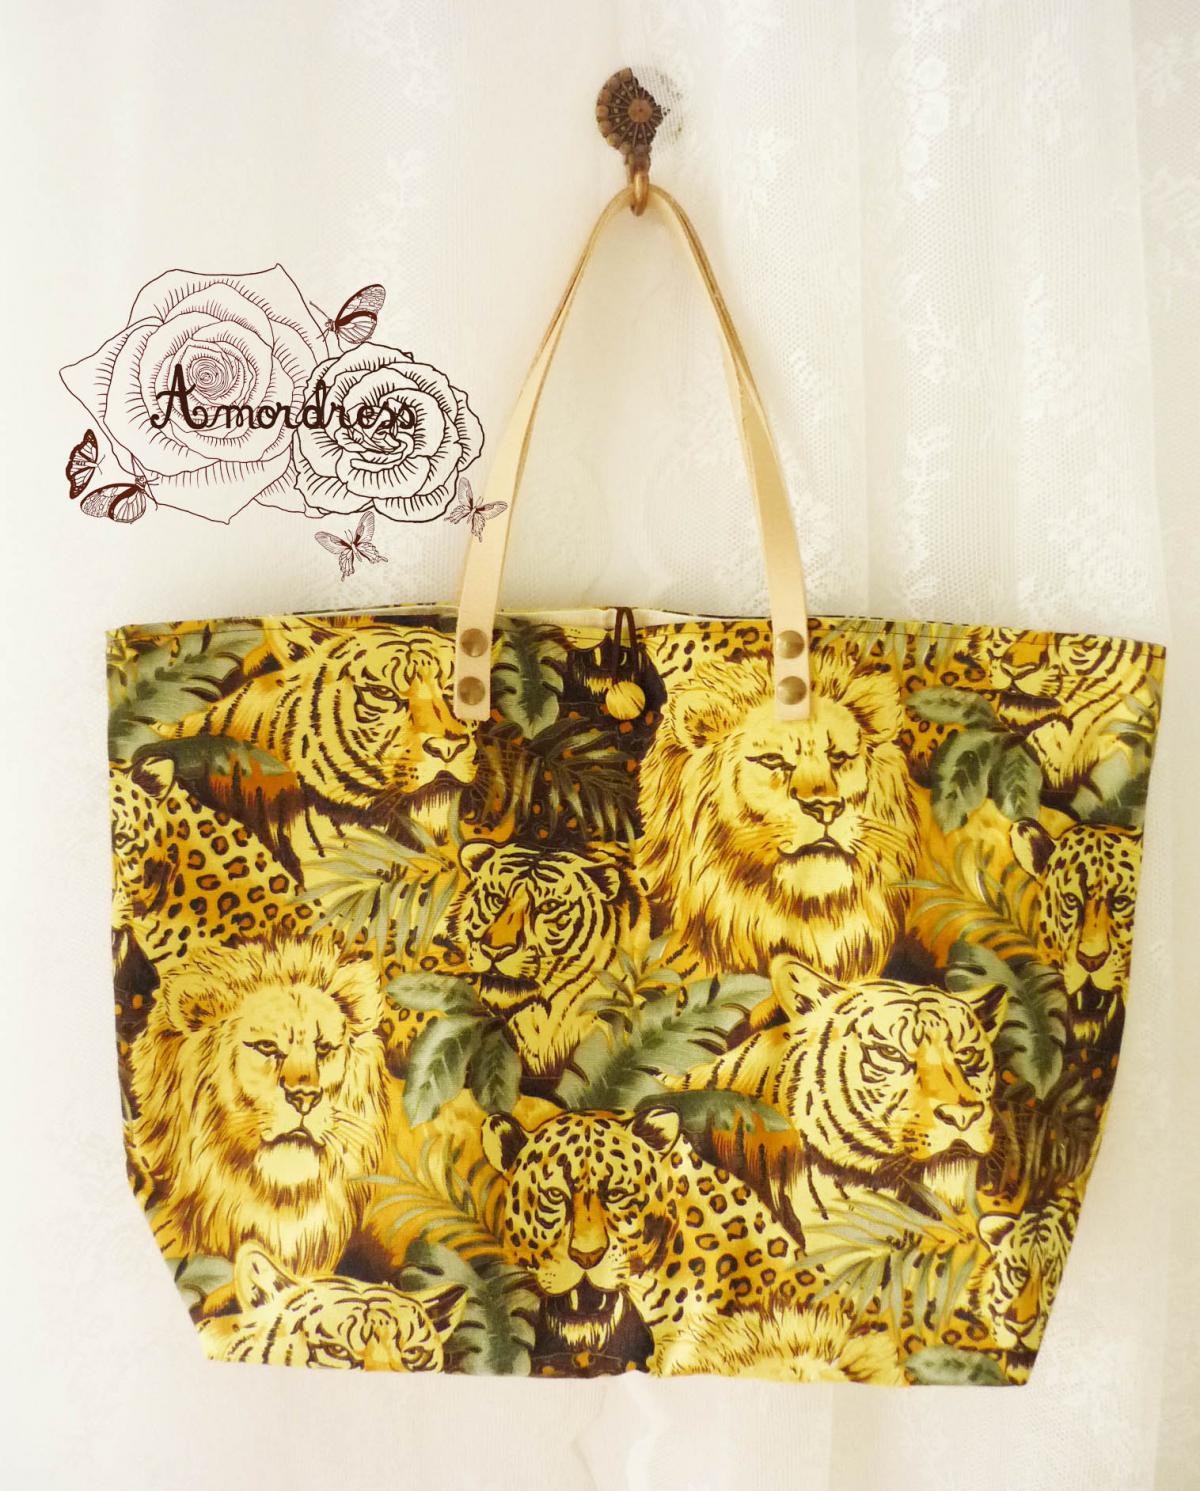 The Safari World Tiger Lion Tote Bag Printed Canvas Bag Genuine Leather Strap Retro Bag ...amor The Inspired Collection...